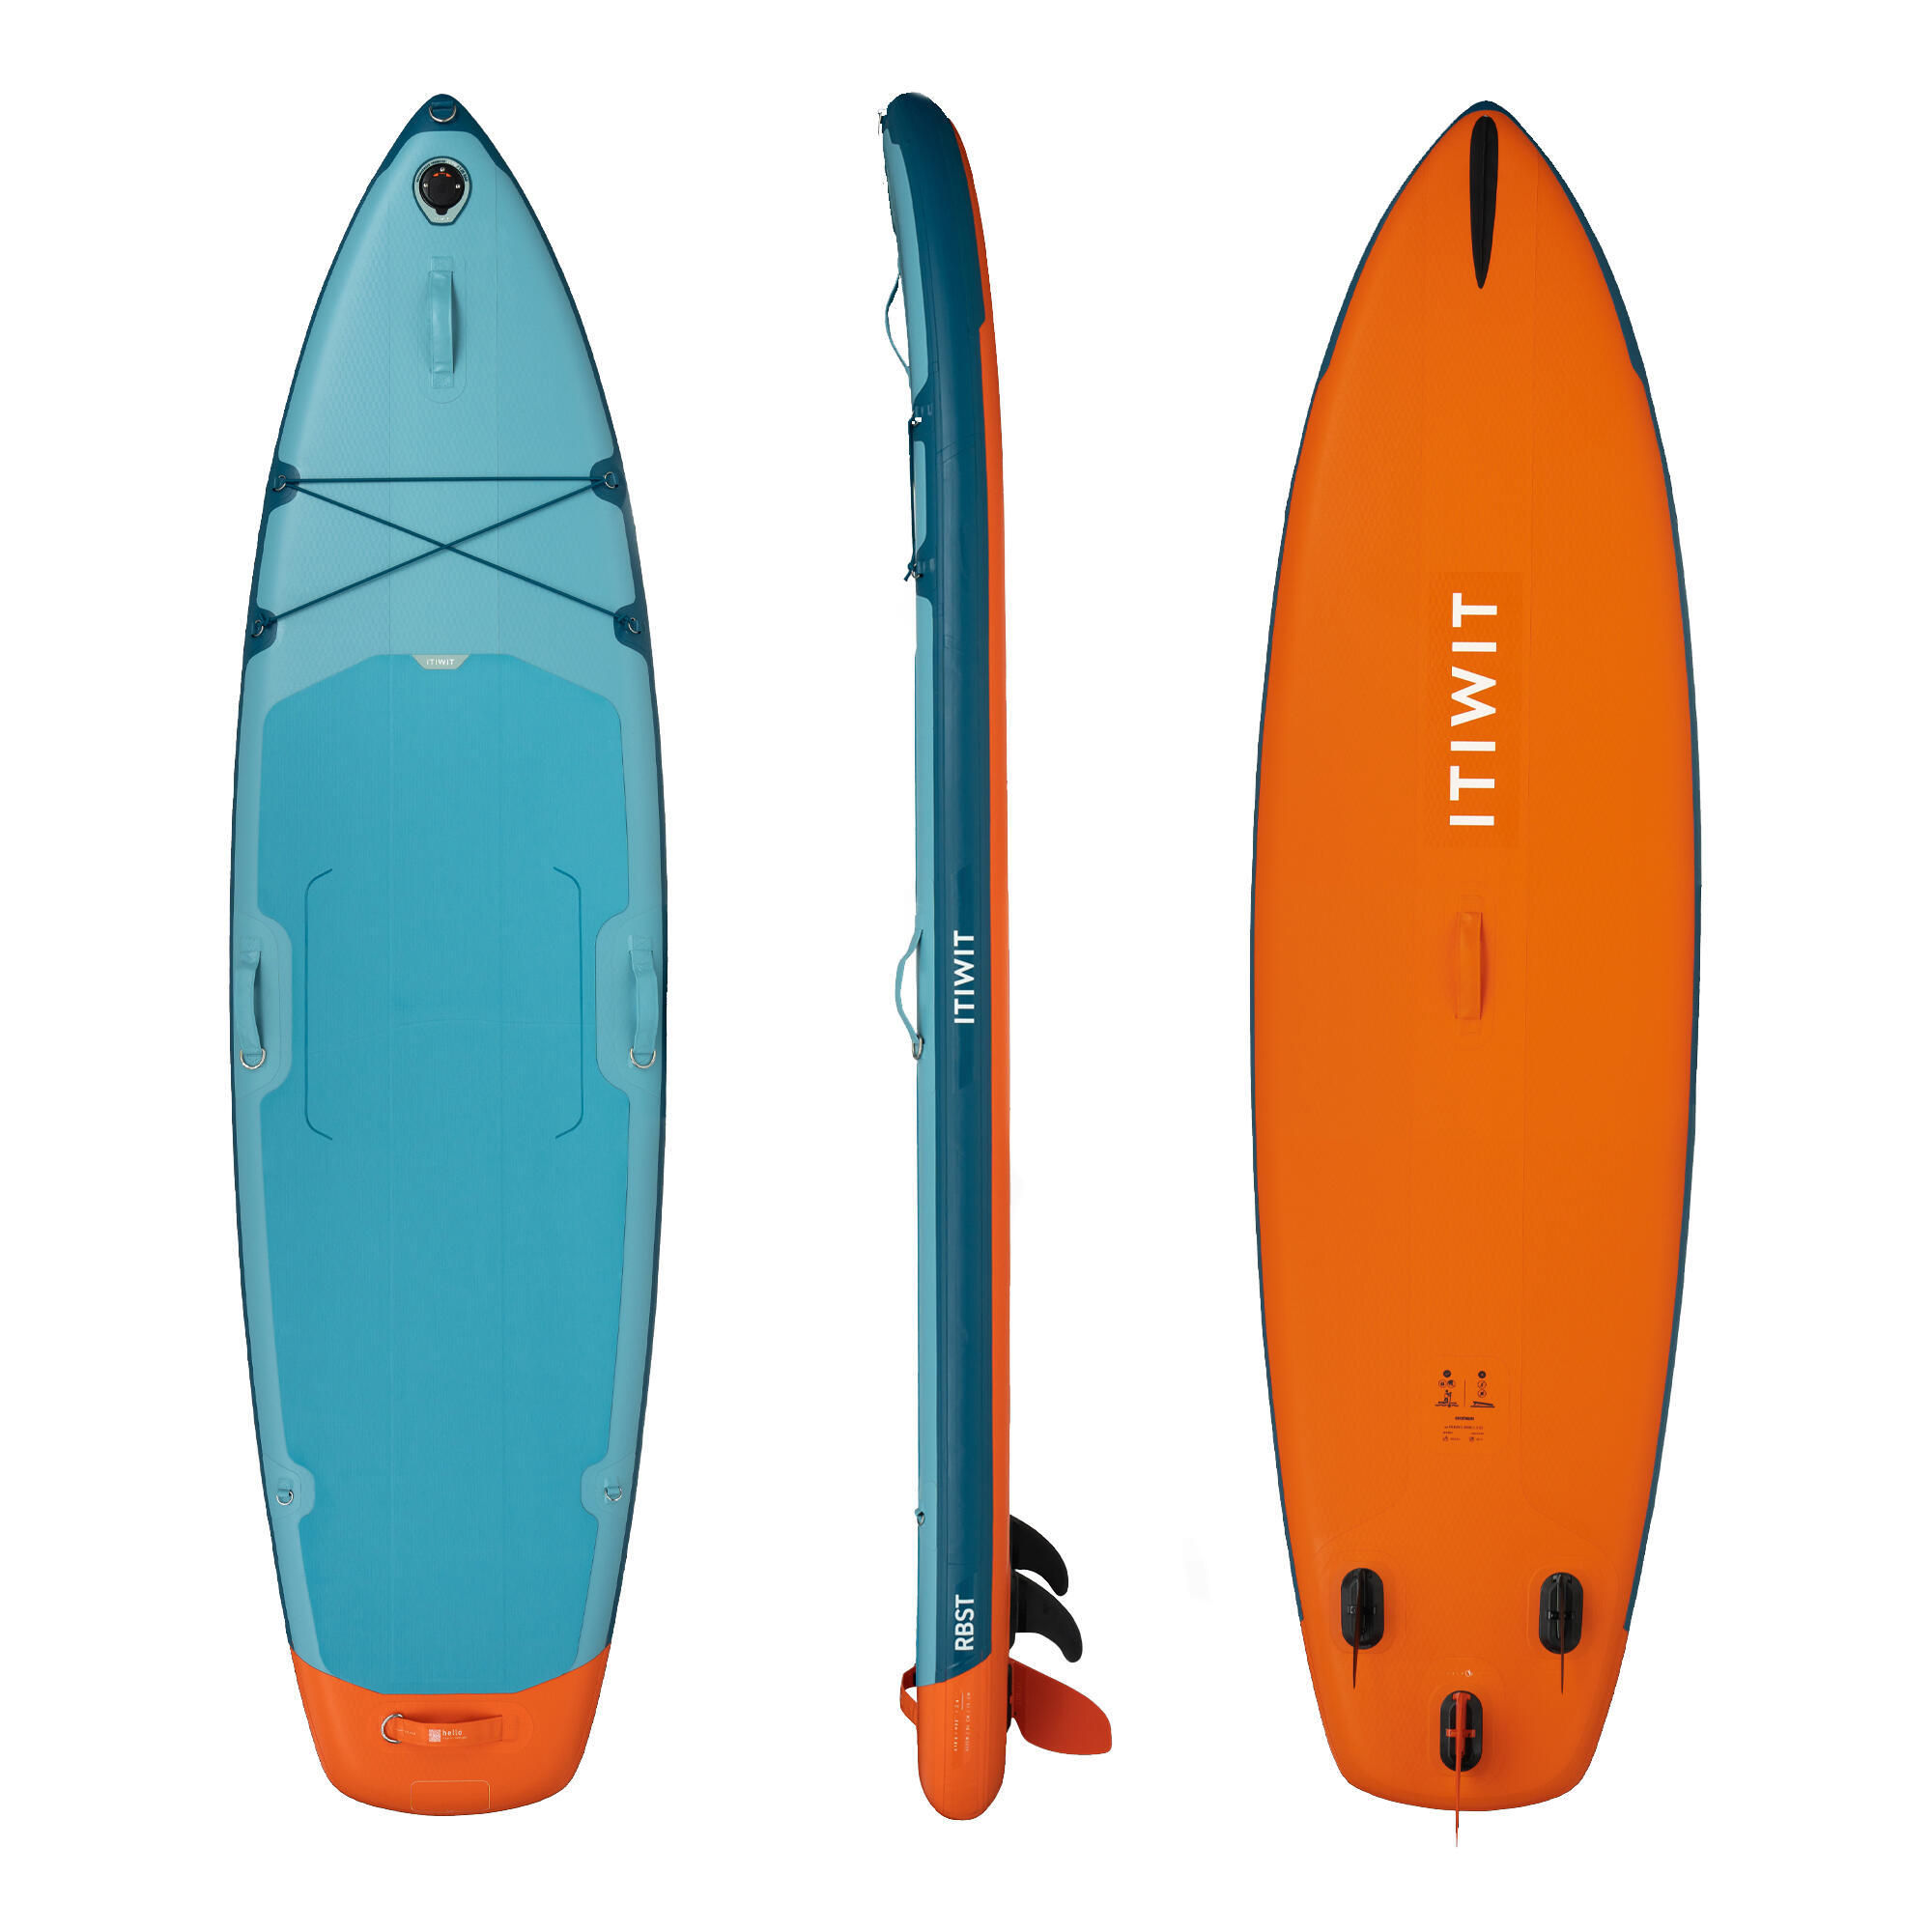 Sturdy inflatable stand up paddle board for rental companies and clubs 3/19